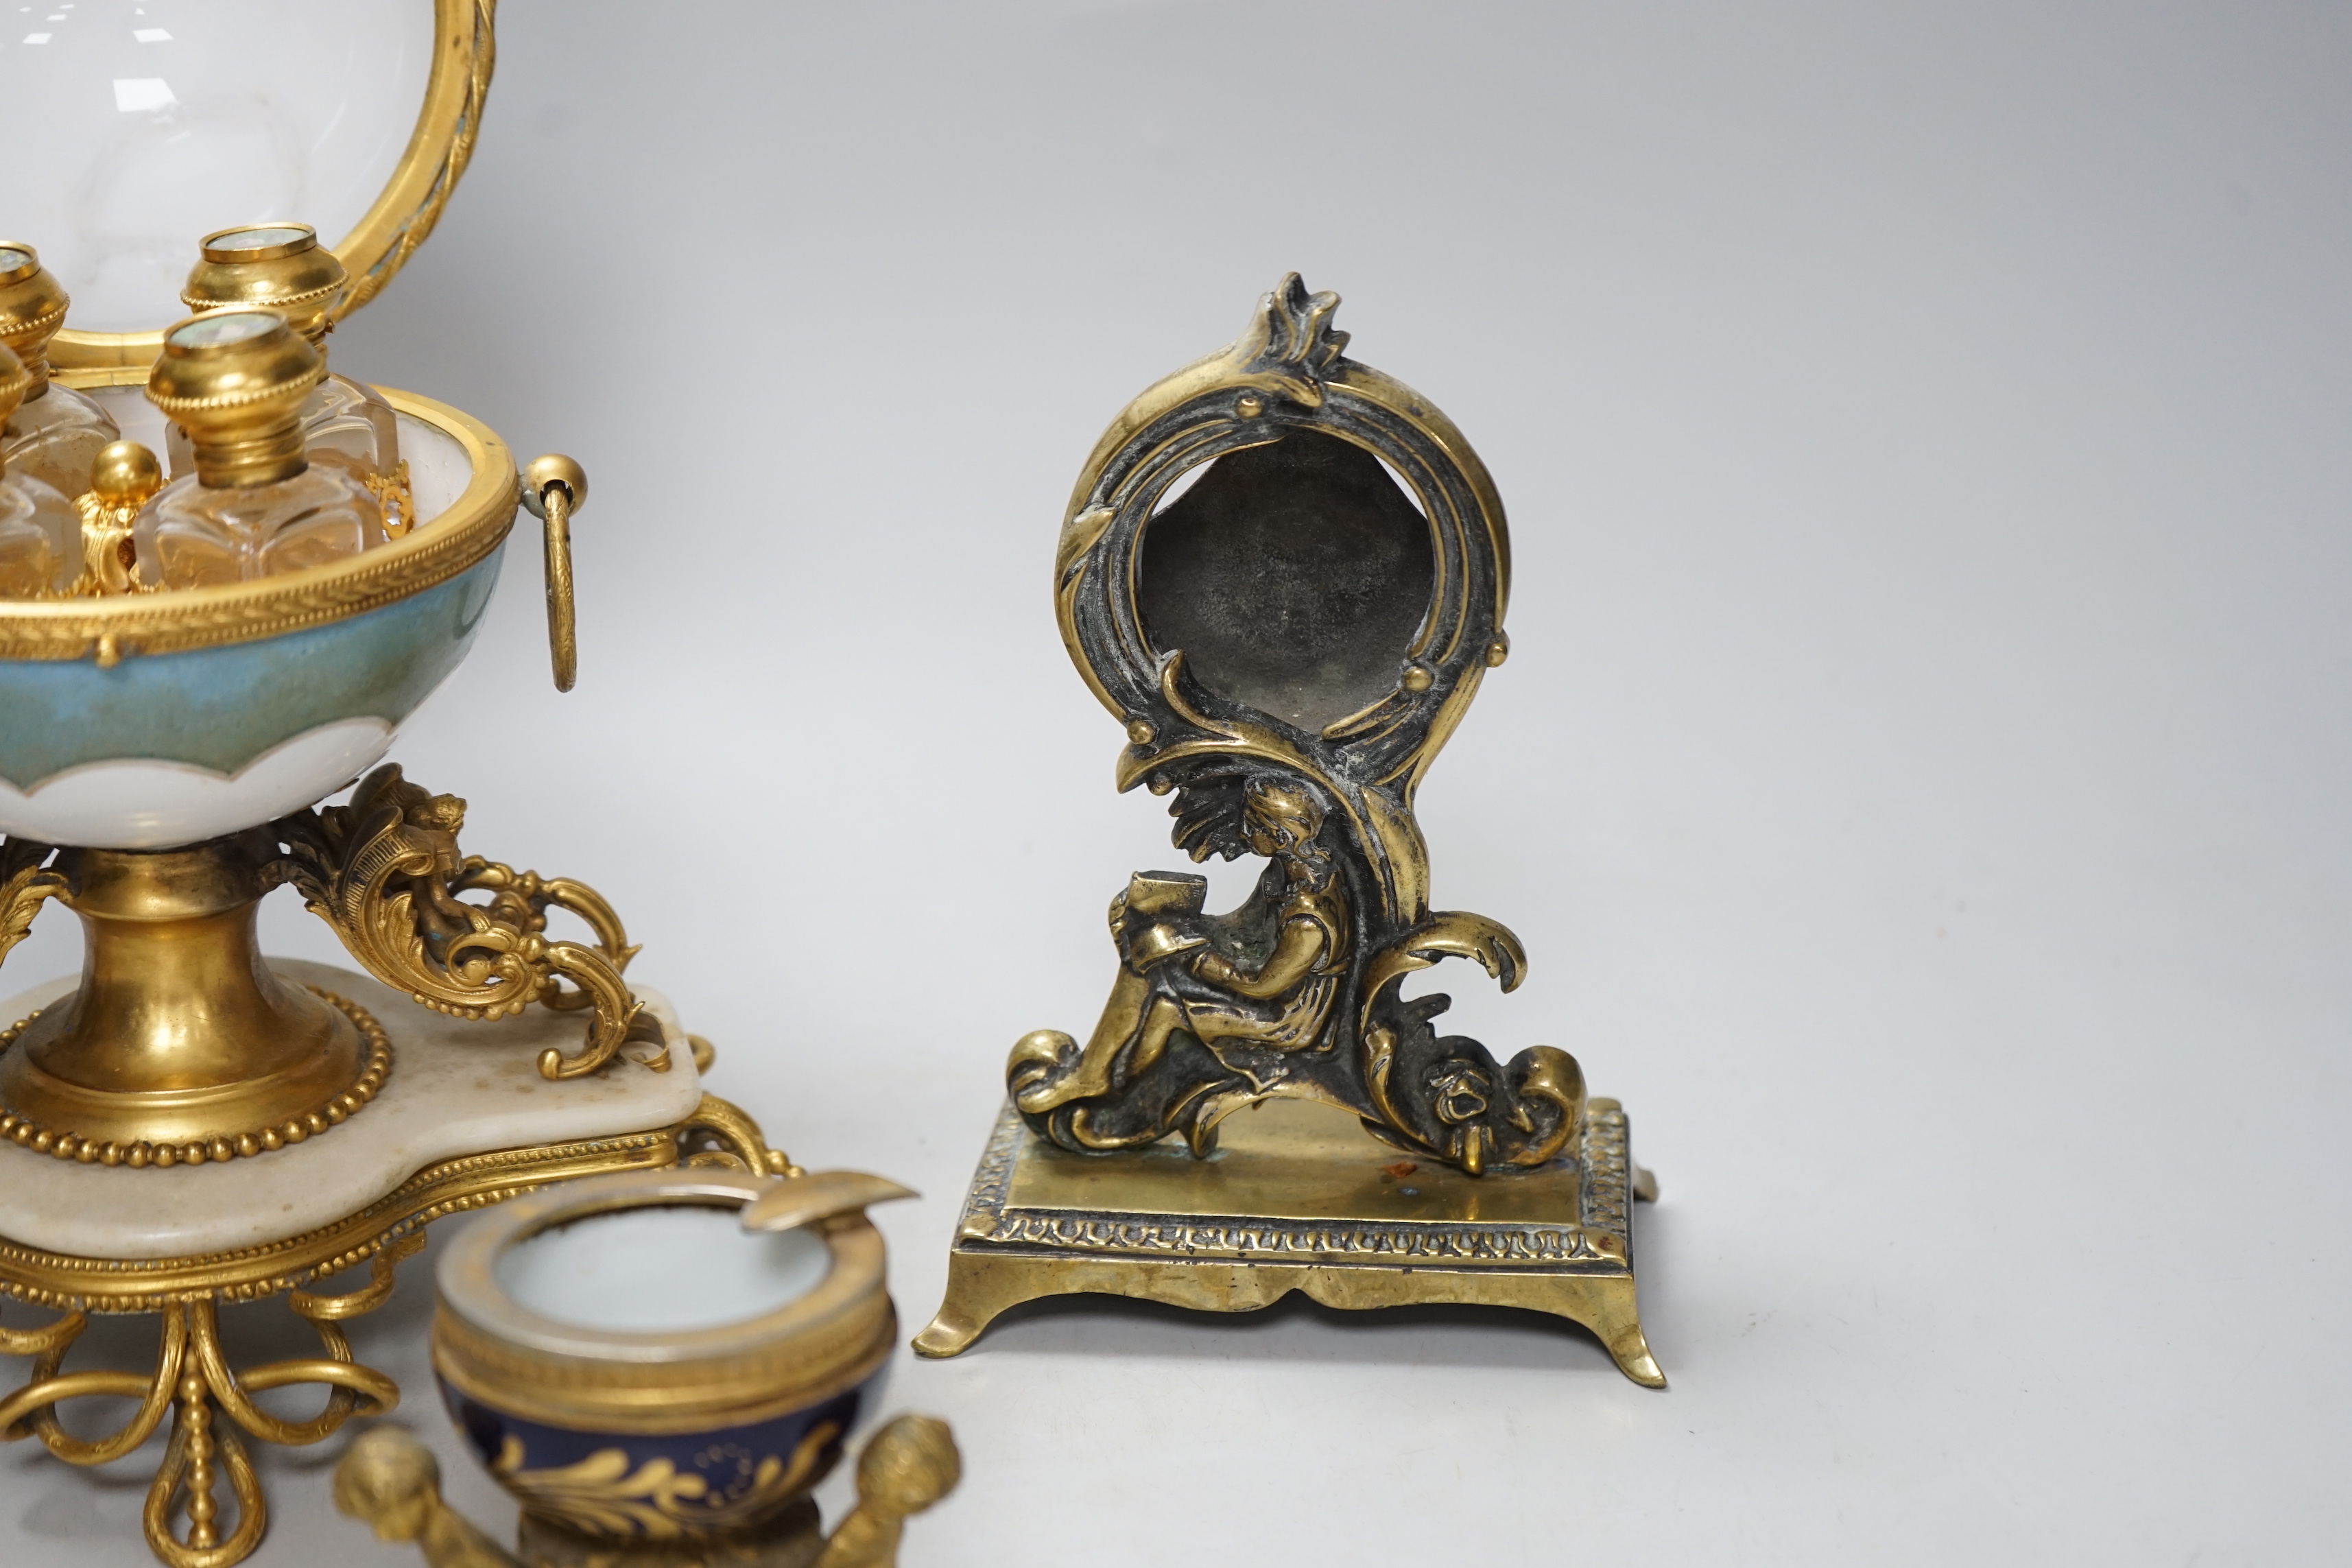 A 19th century French globular scent bottle casket together with a similar ash tray and a watch - Image 2 of 5